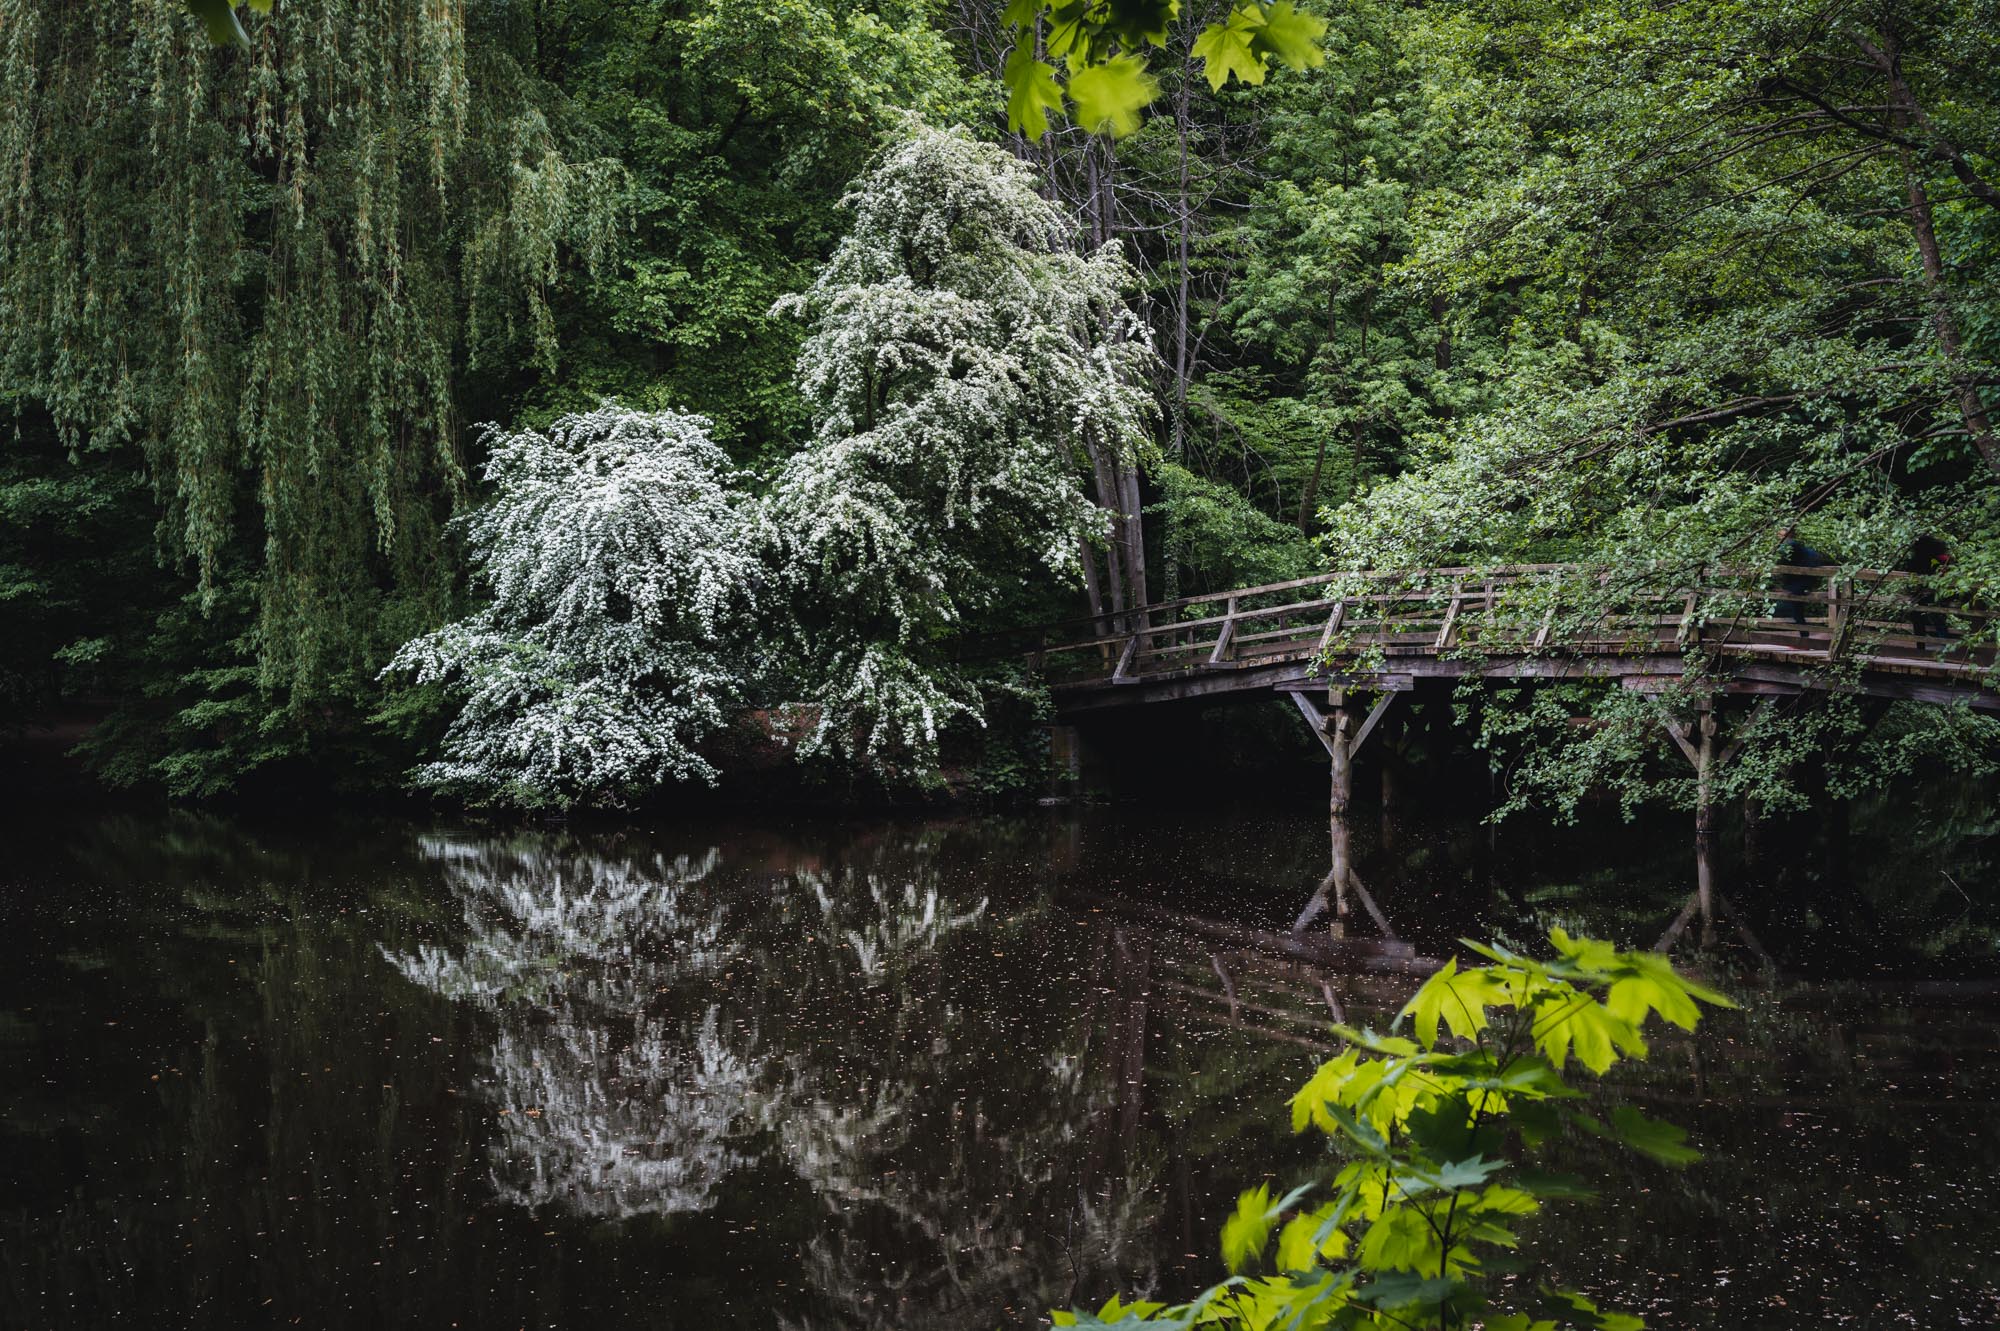 a wooden bridge in the city forest.